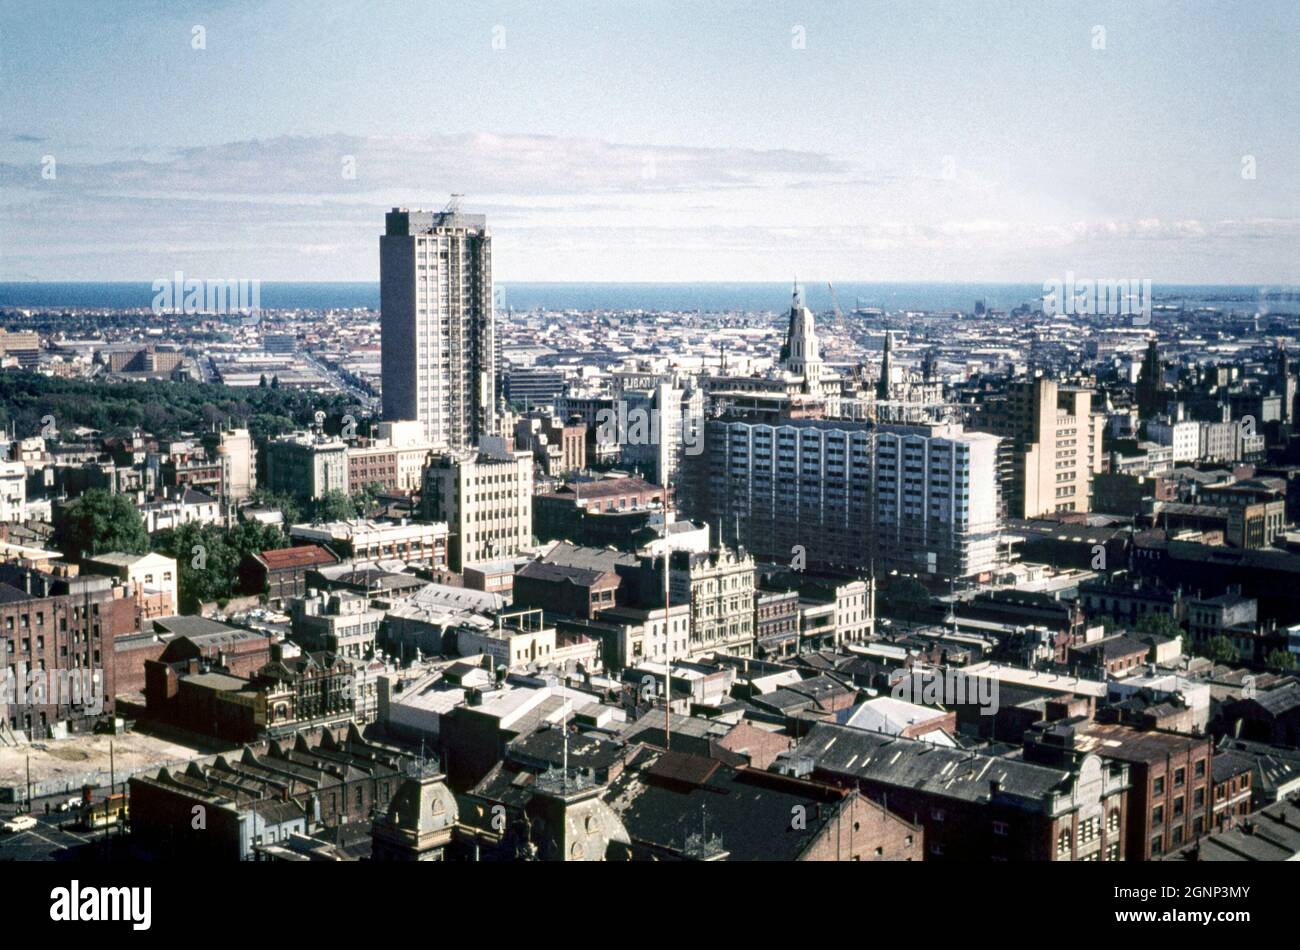 An aerial view looking south from the central business district (CBD) towards Port Phillip Bay, Melbourne, Victoria, Australia in 1961. This image is from an amateur photographer’s 35mm colour transparency – a vintage 1960s photograph. Stock Photo